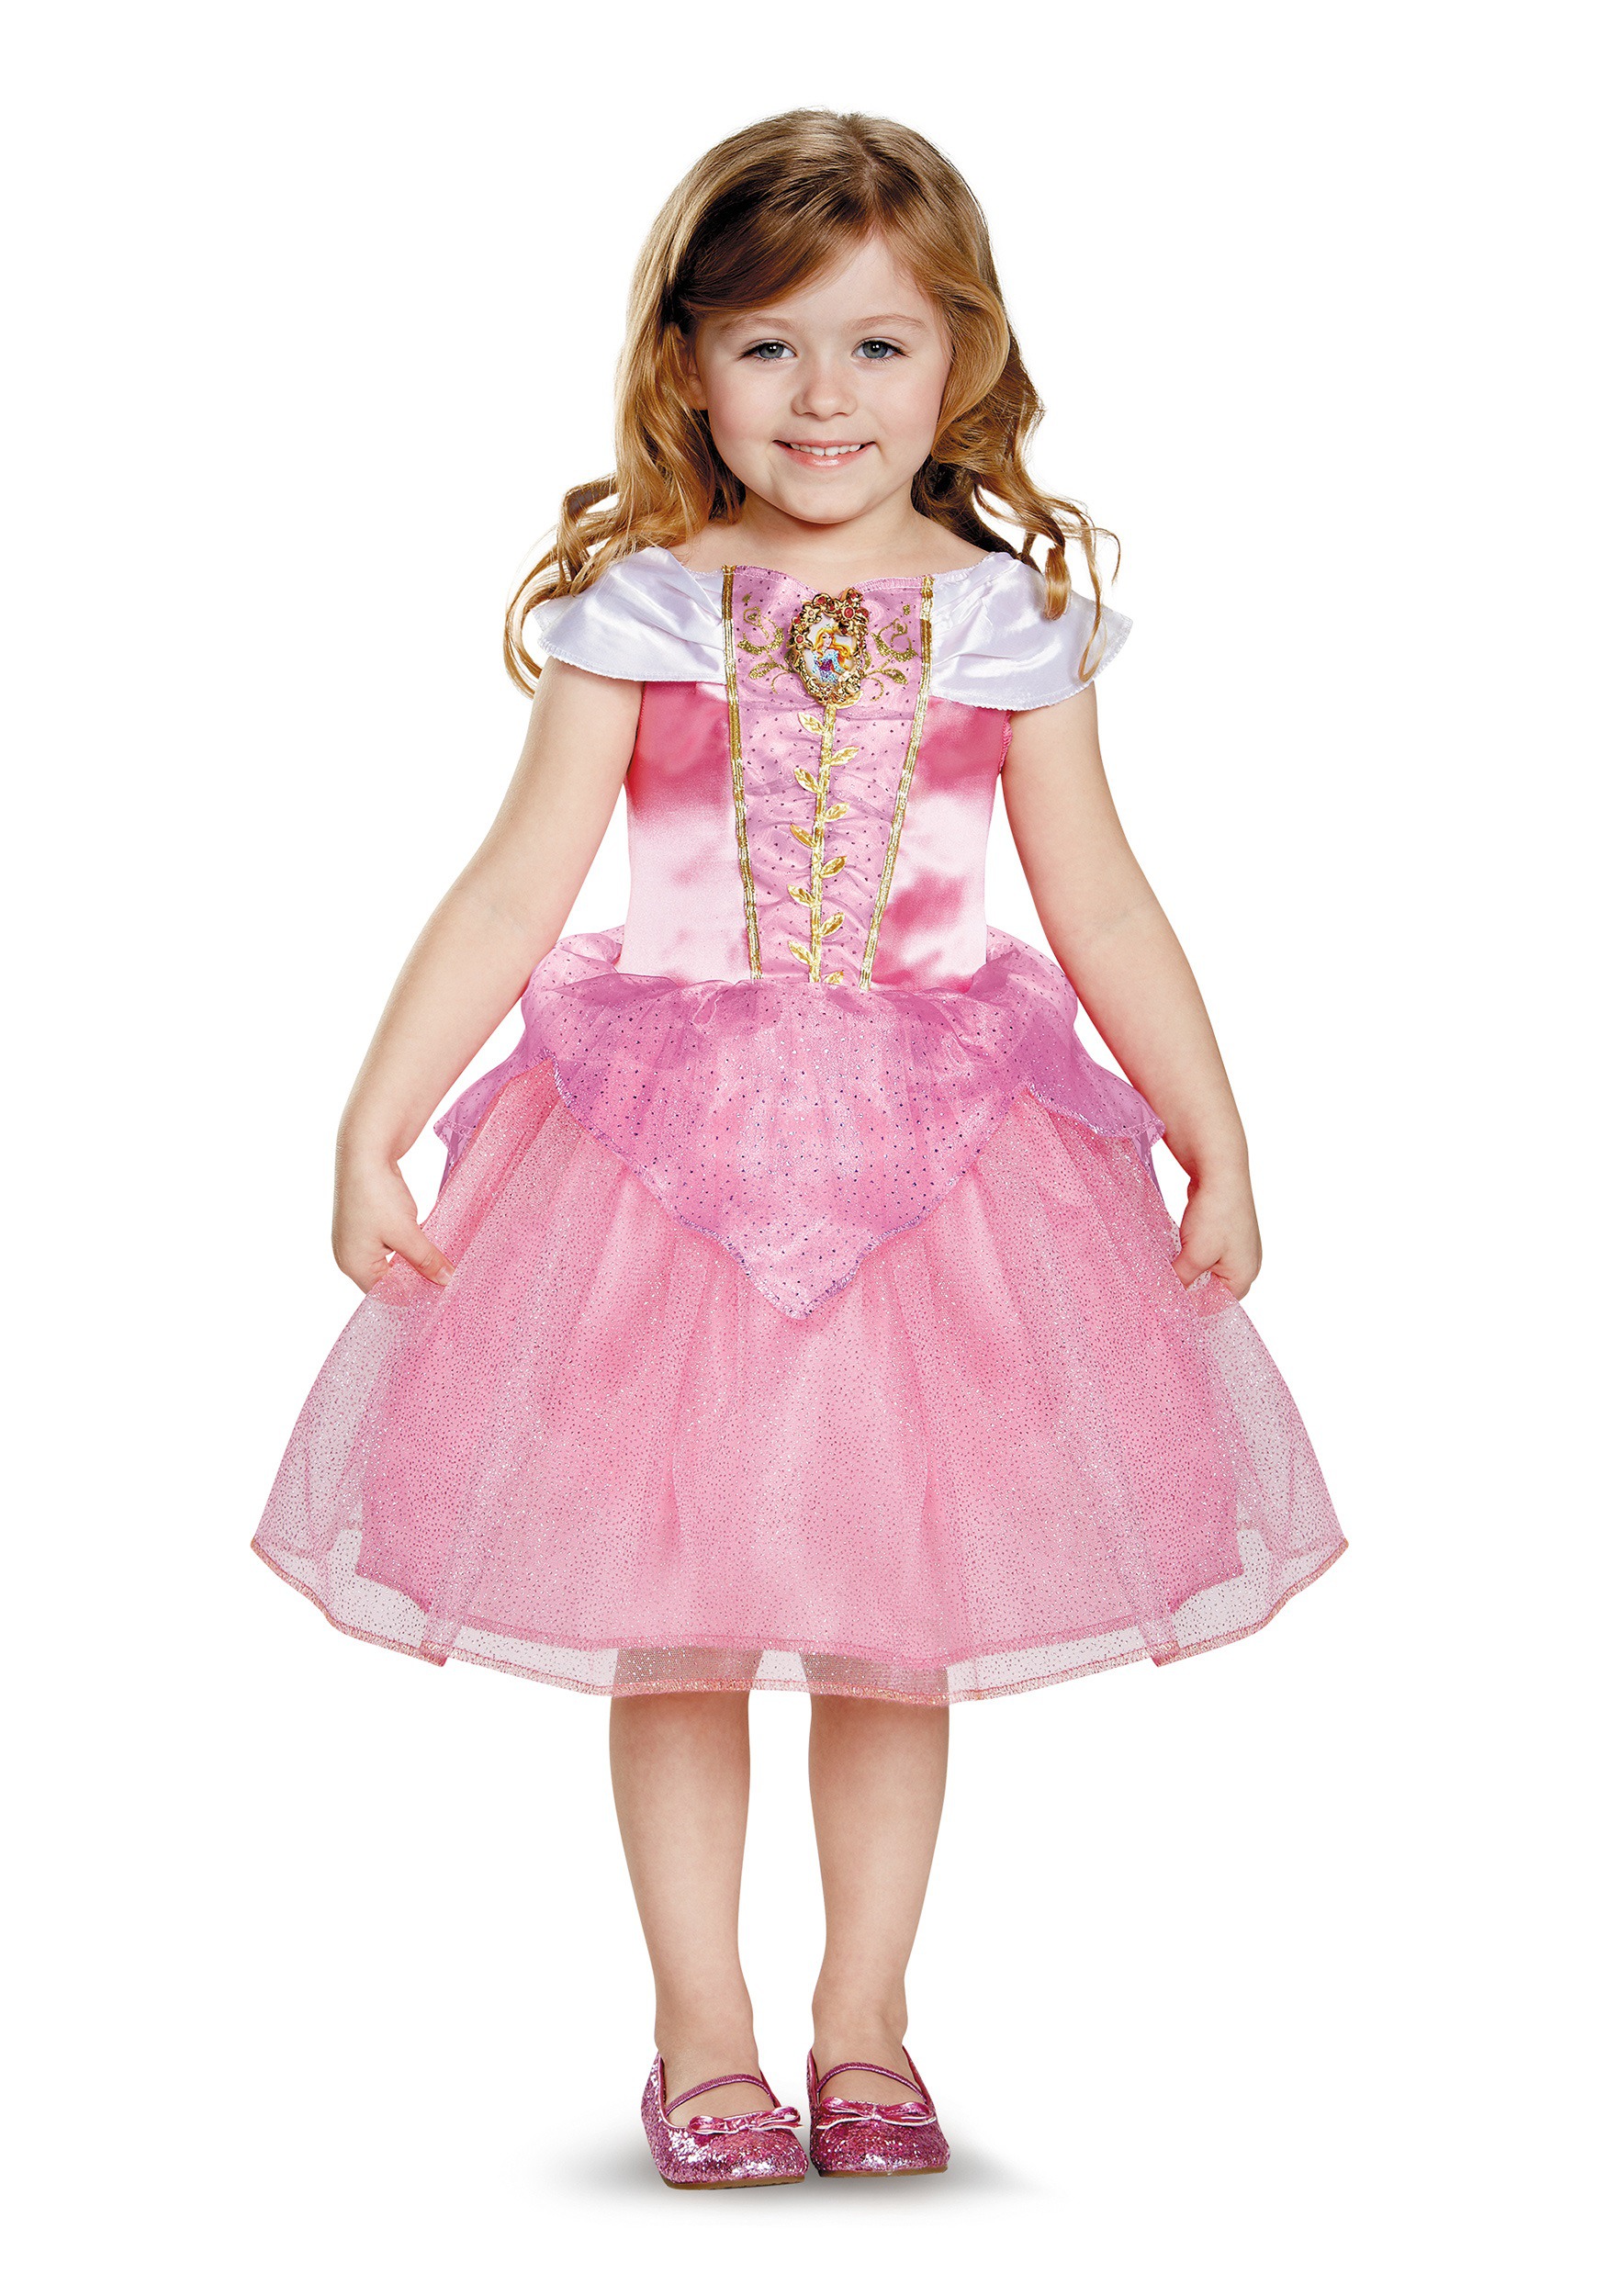 Photos - Fancy Dress Aurora Disguise  Classic Girl's Toddler Costume Pink/White DI82908 